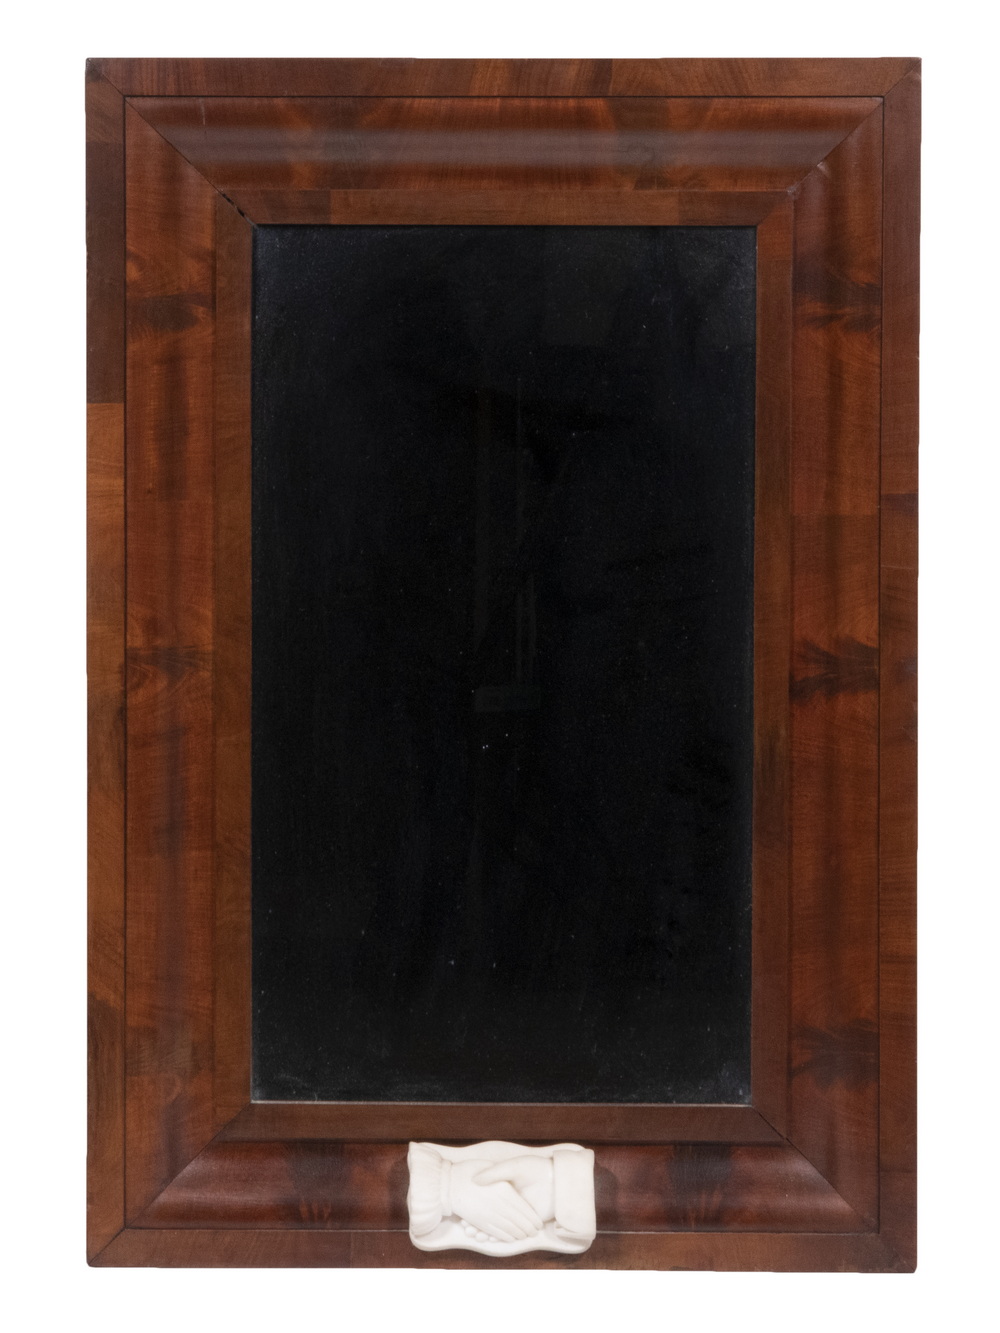 MAHOGANY OGEE MIRROR WITH MARBLE